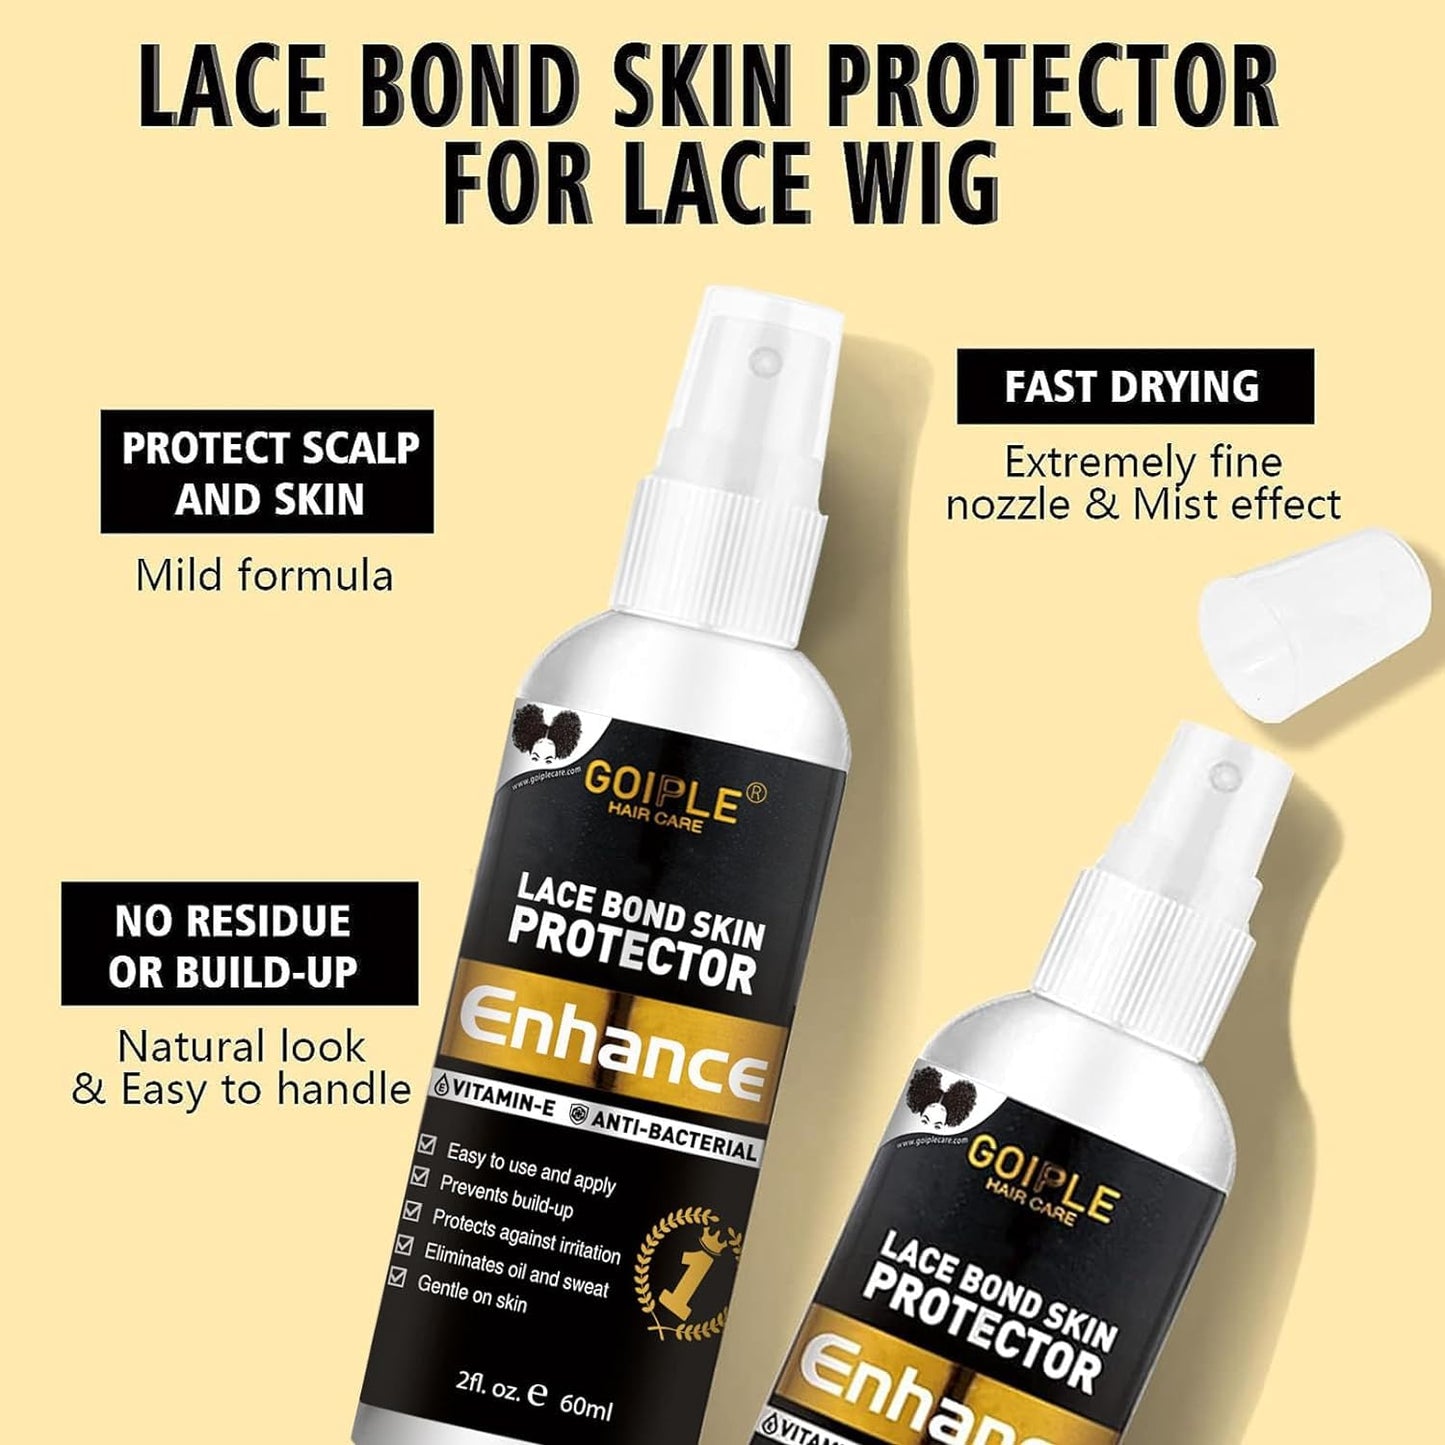 Wig Glue Lace Glue for Lace Front Wigs, Strong Hold Lace Front Wig Glue for Wigs, Lace Adhesive Hair Replacement with Wig Glue Remover, Wig Melting Band, Hair Wax Stick, Edge Control Edge Brush